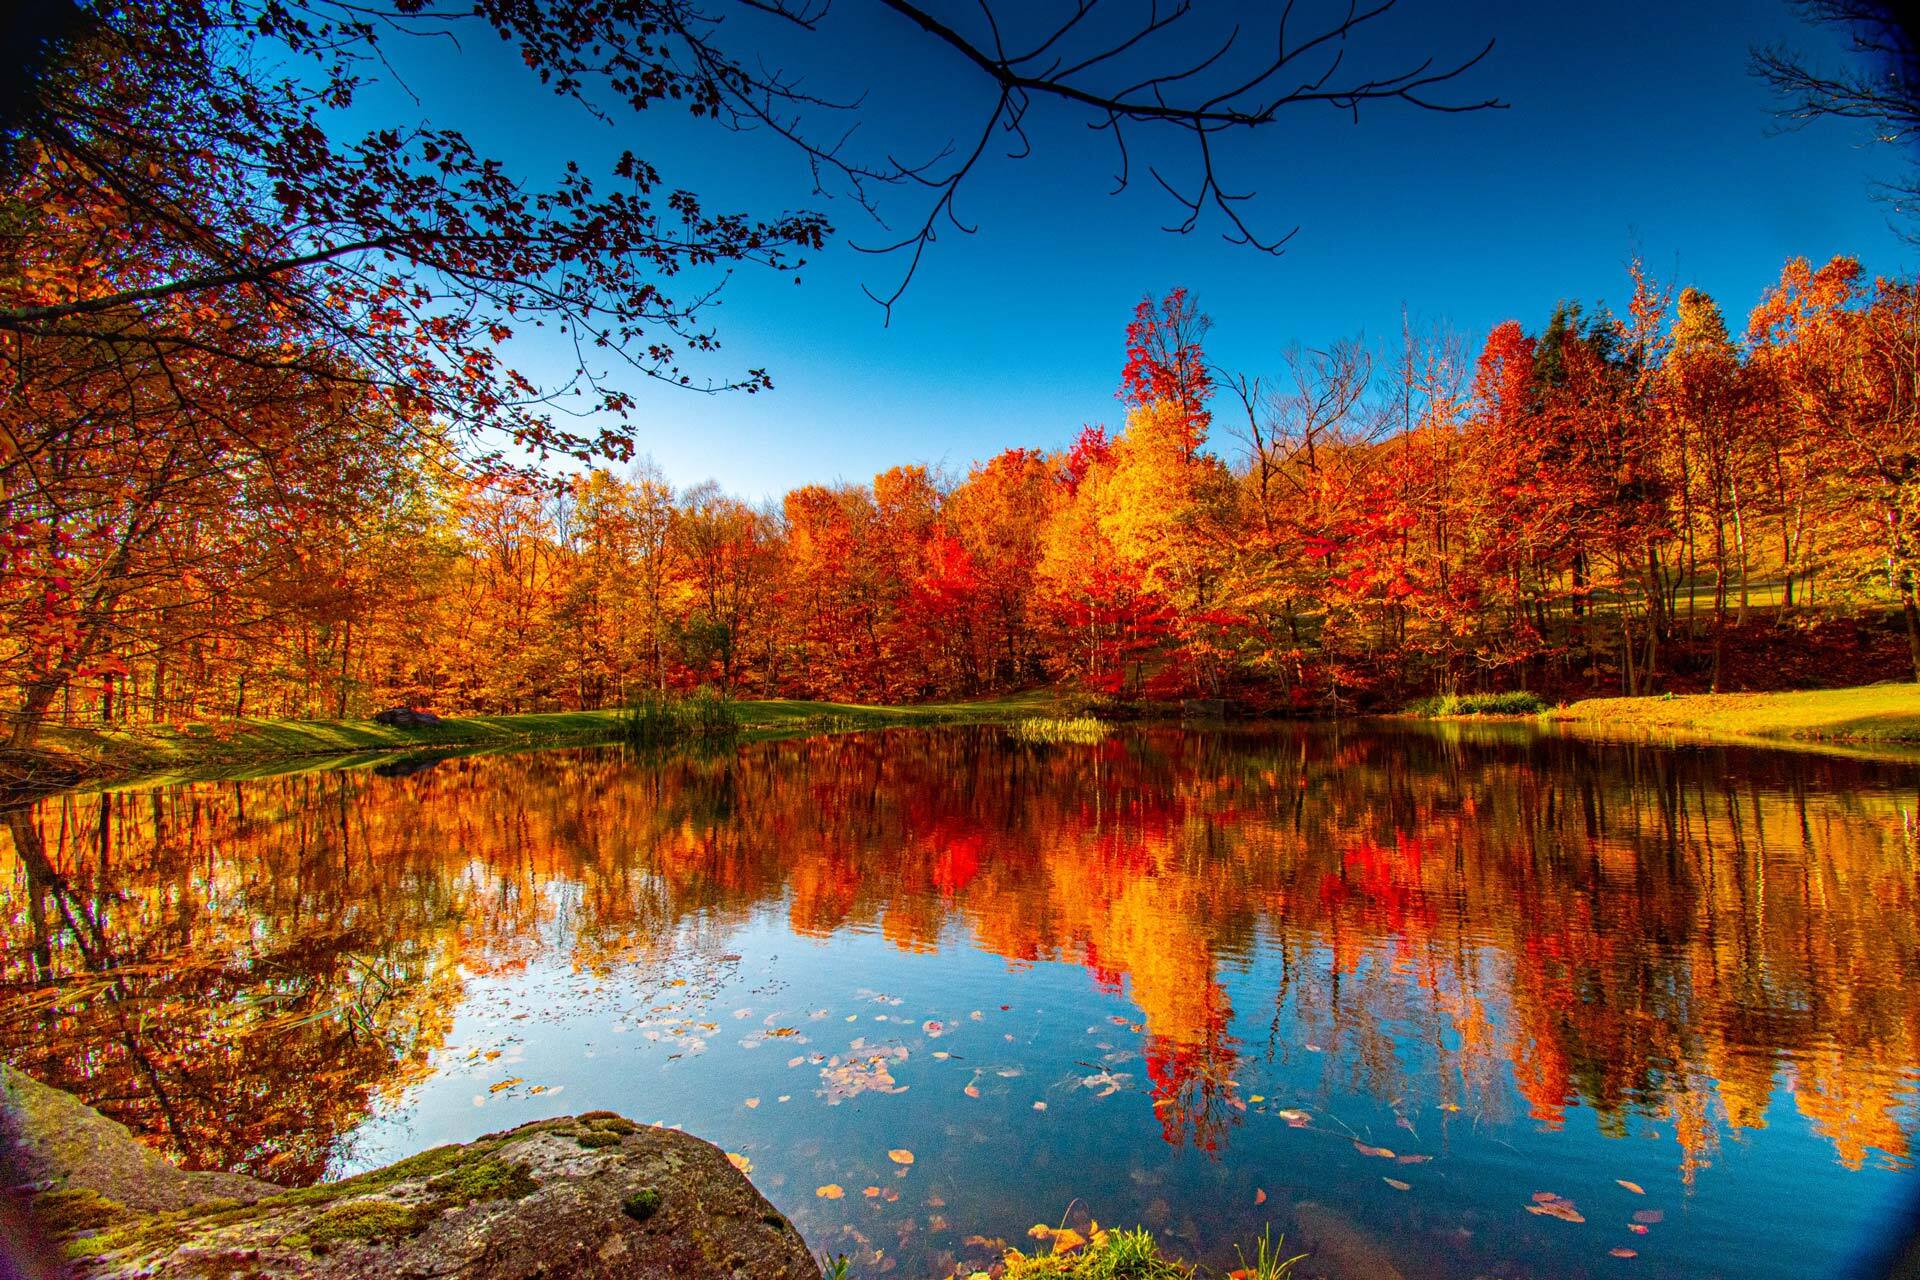 Lake in middle of forest during fall